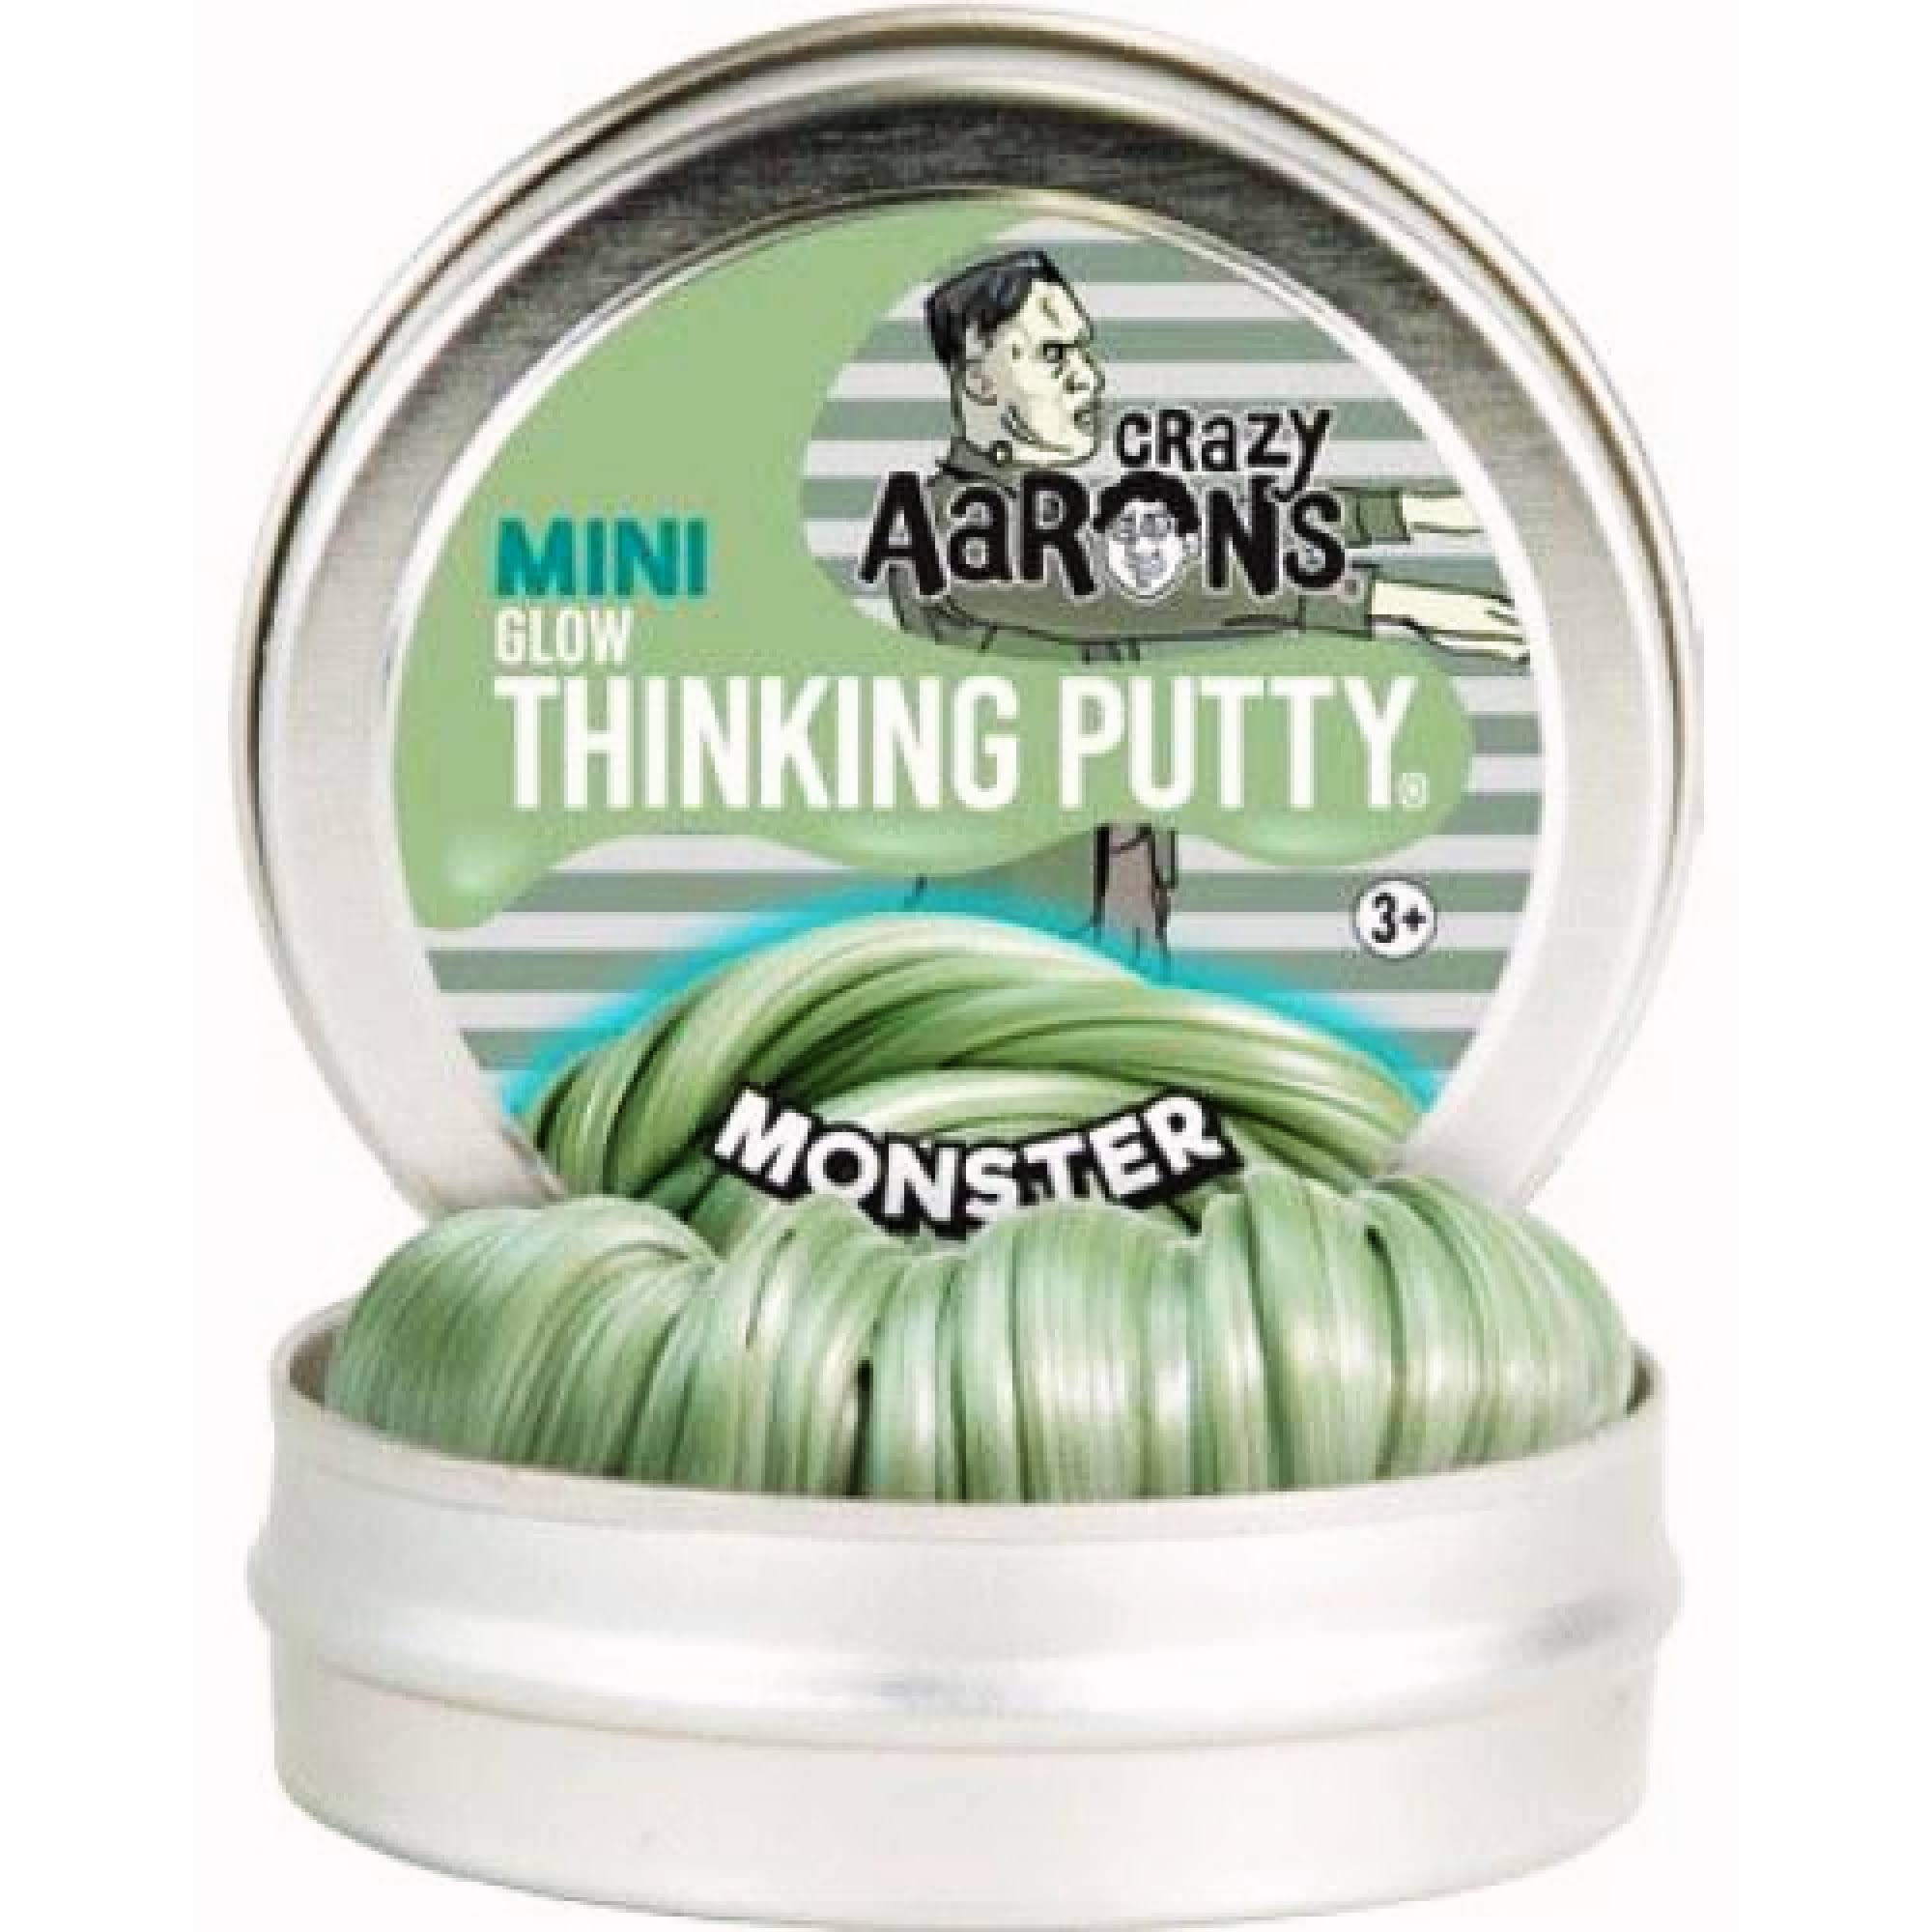 Crazy Aaron's Thinking Putty | Mini - Monster